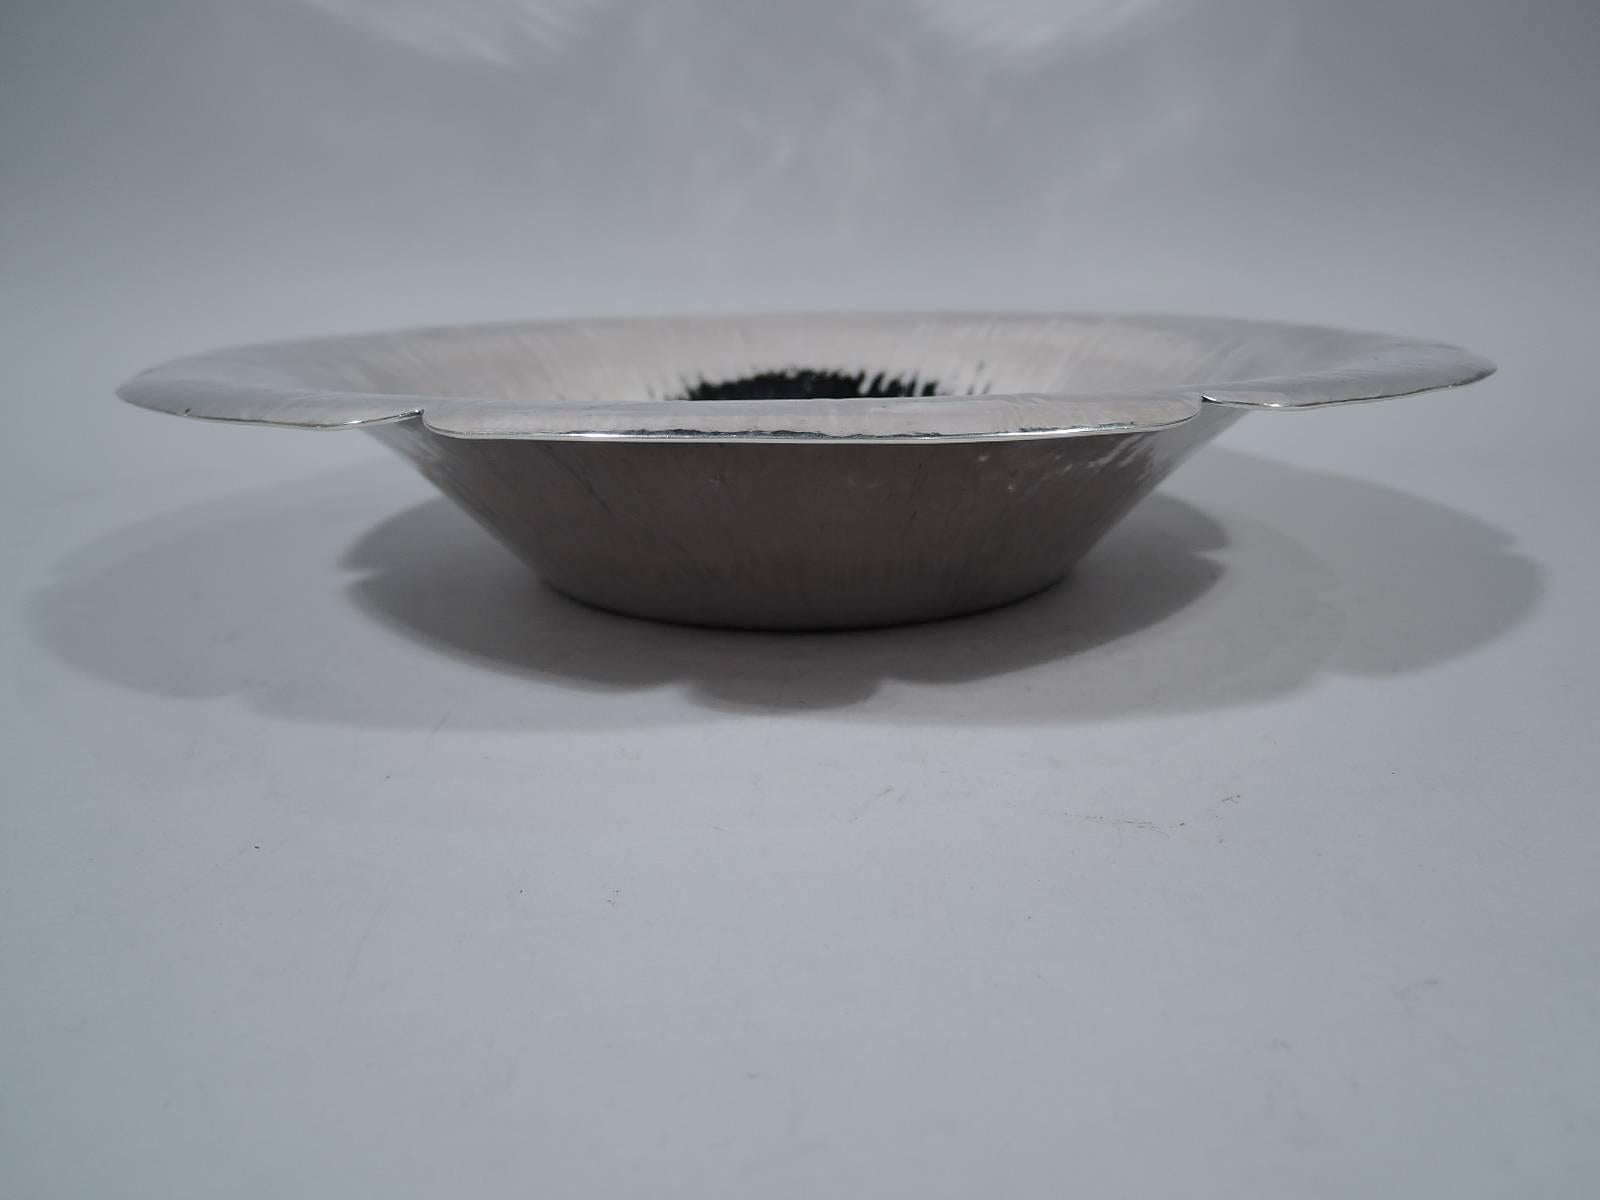 Large handmade sterling silver centerpiece bowl. Made by William Waldo Dodge Jr in Asheville, North Carolina. Plain circular well. Sides curved and flared with shimmering striation. Rim has shallow scallops. An interesting design that is sometimes